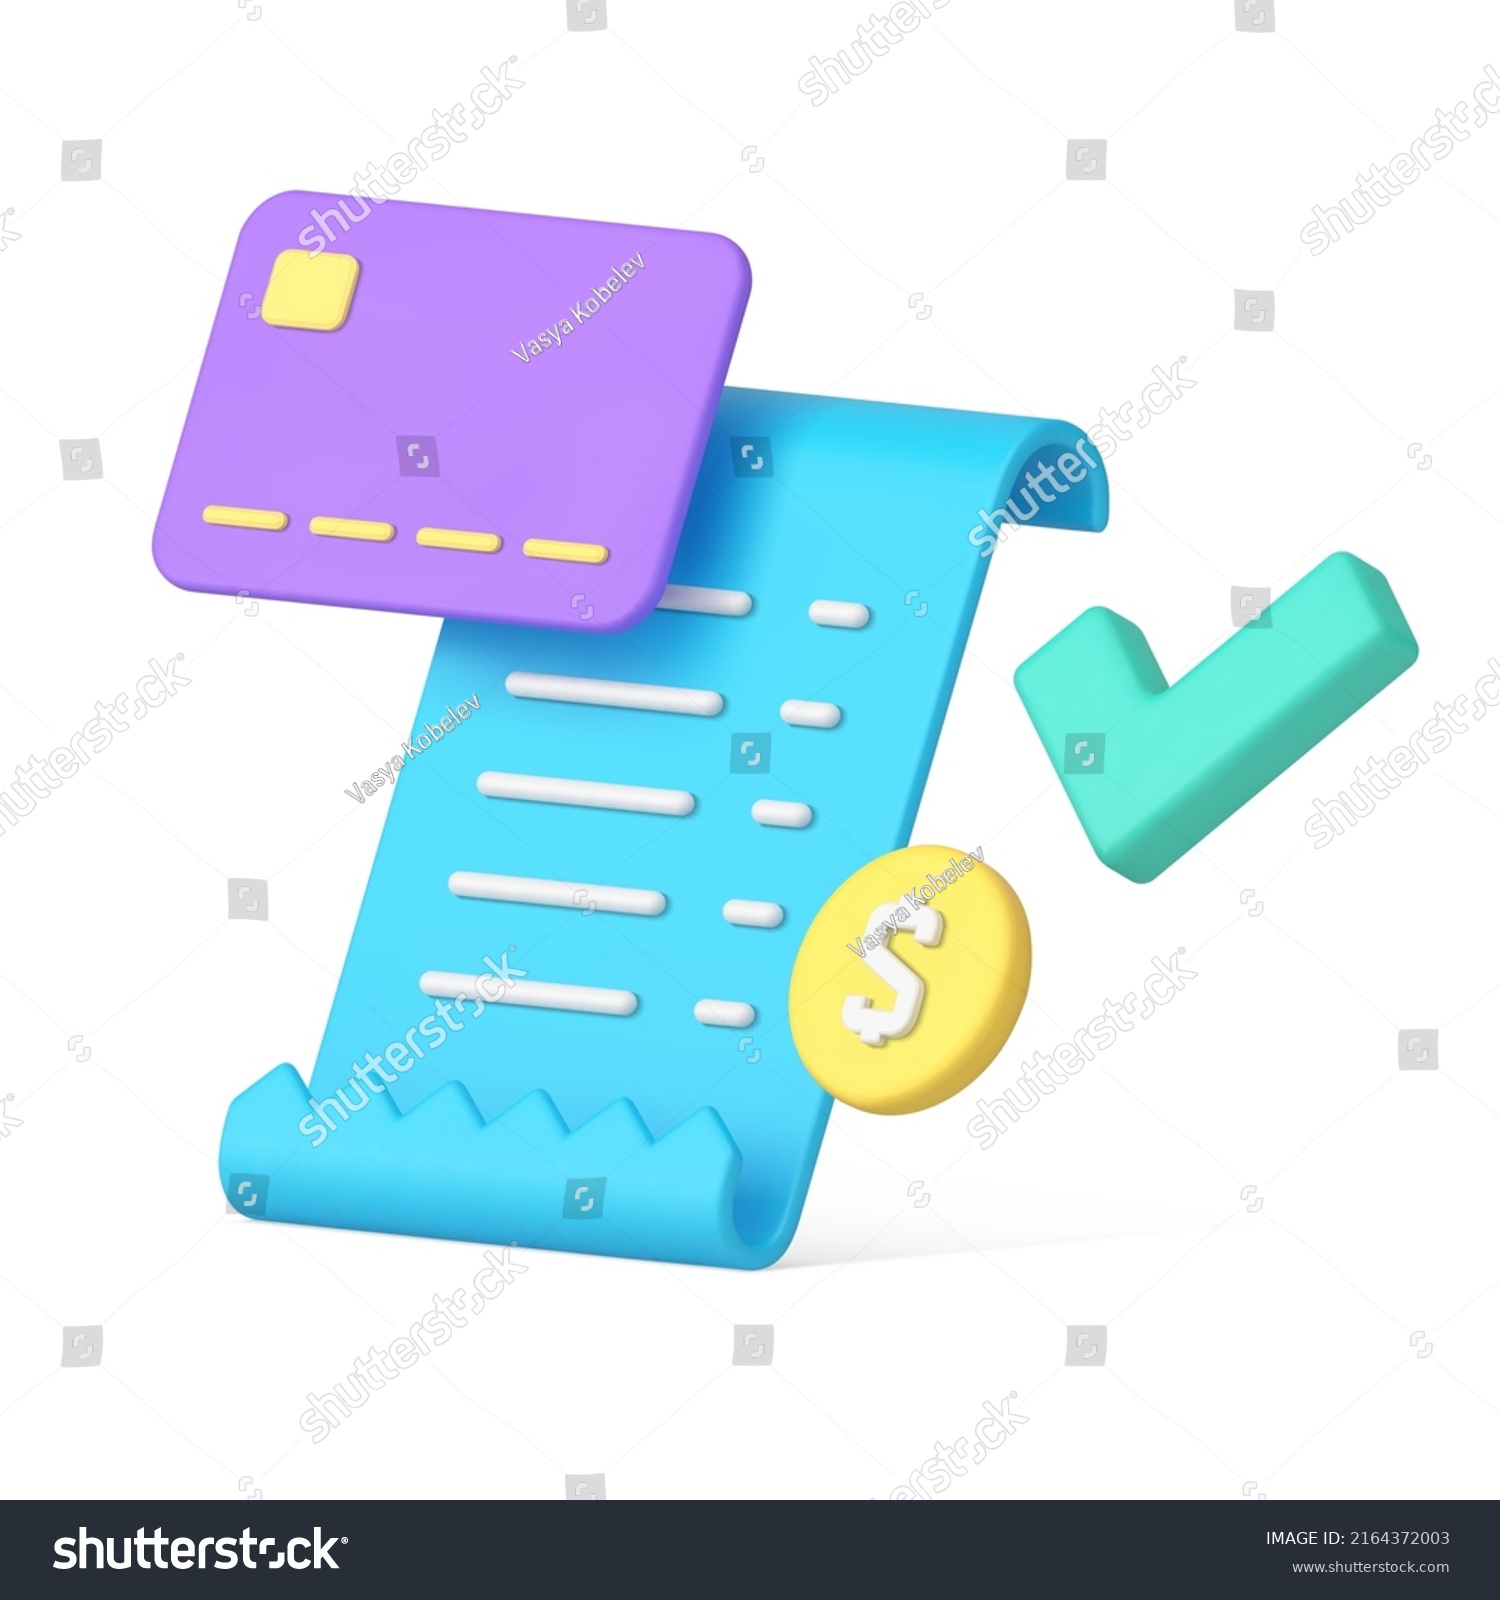 SVG of Realistic success banking paid paper document with checkmark diagonal placed isometric 3d icon vector illustration. Accounting payment tax form business invoice pay confirm order notification svg